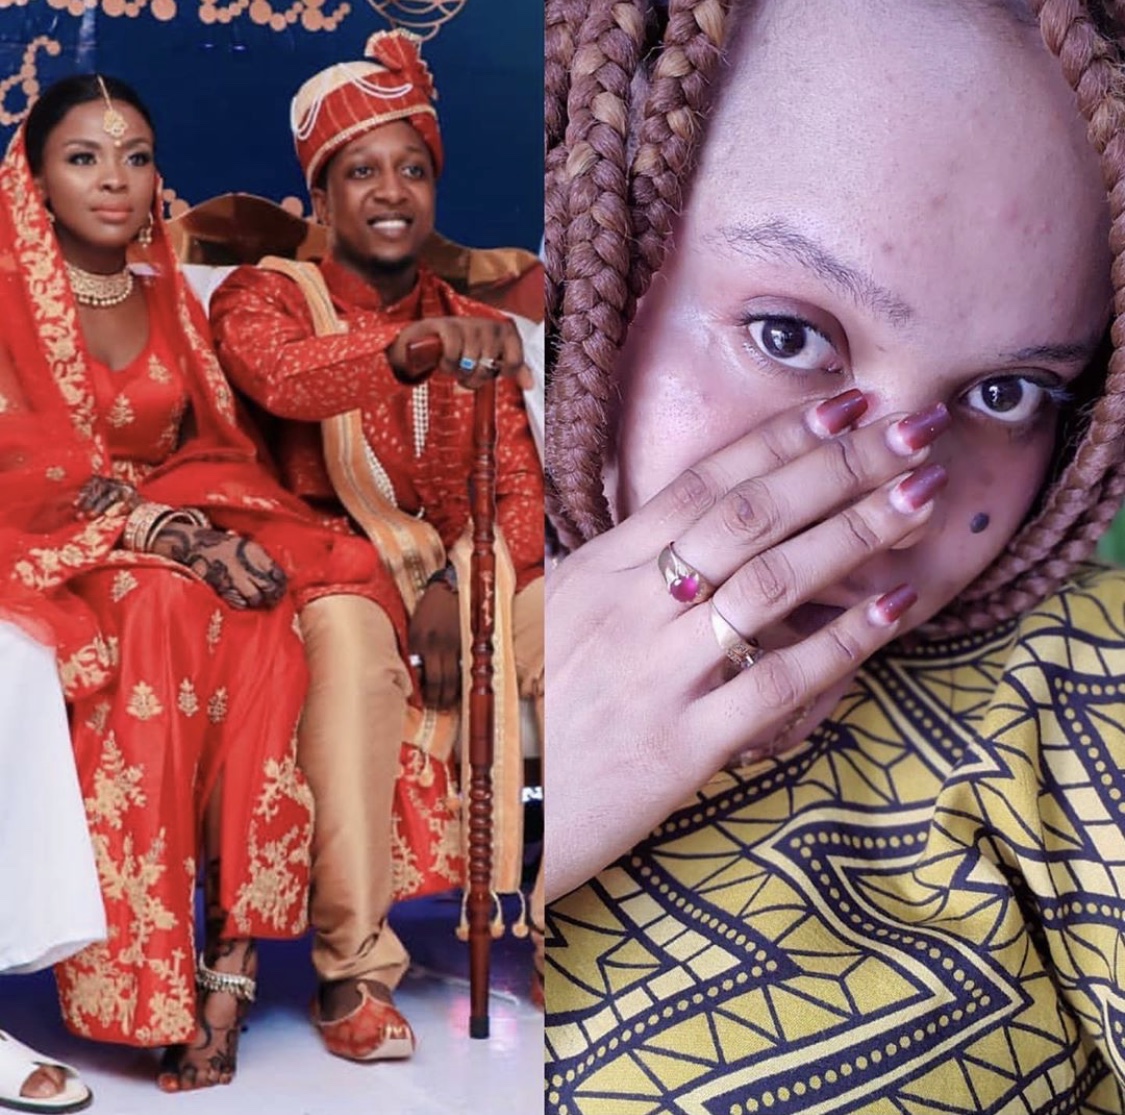 Meet the 1st wife married to Queen Darleen’s new husband